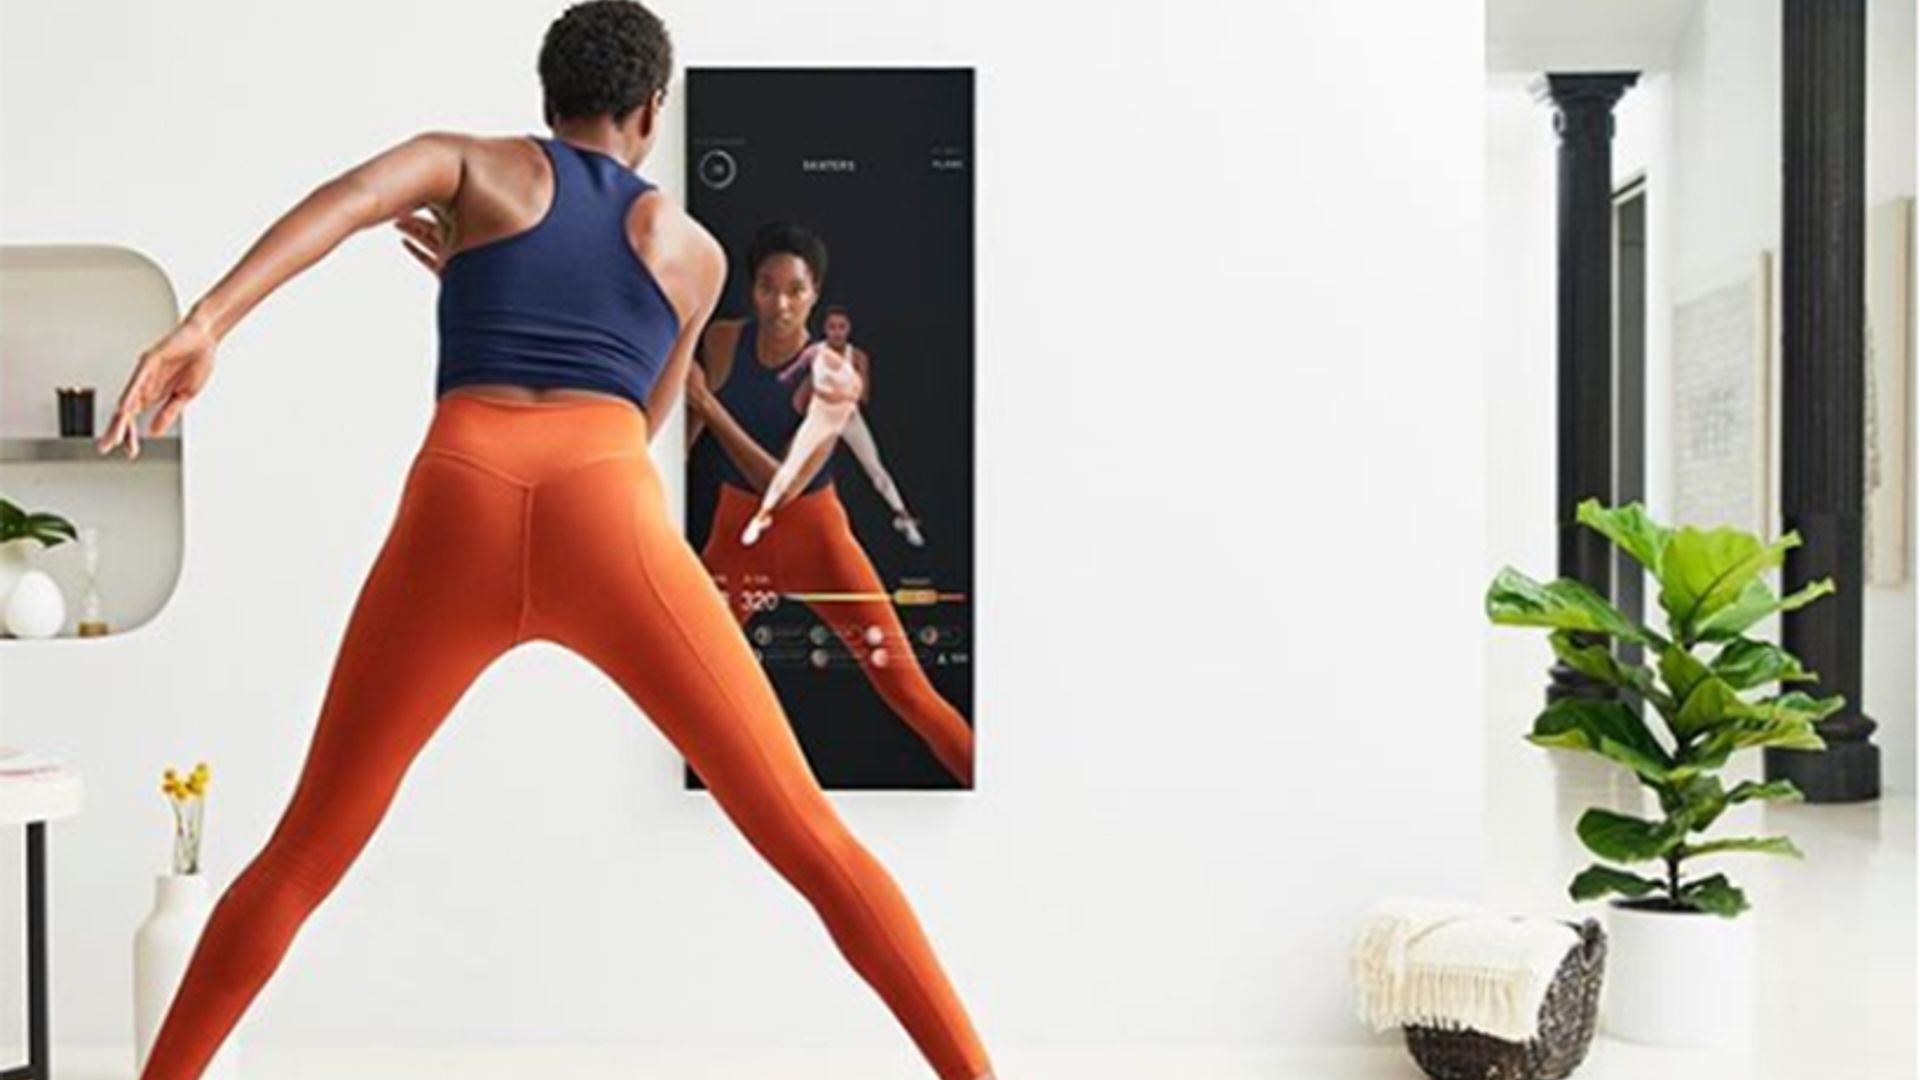 Do you workout at home? There's a smart mirror for that